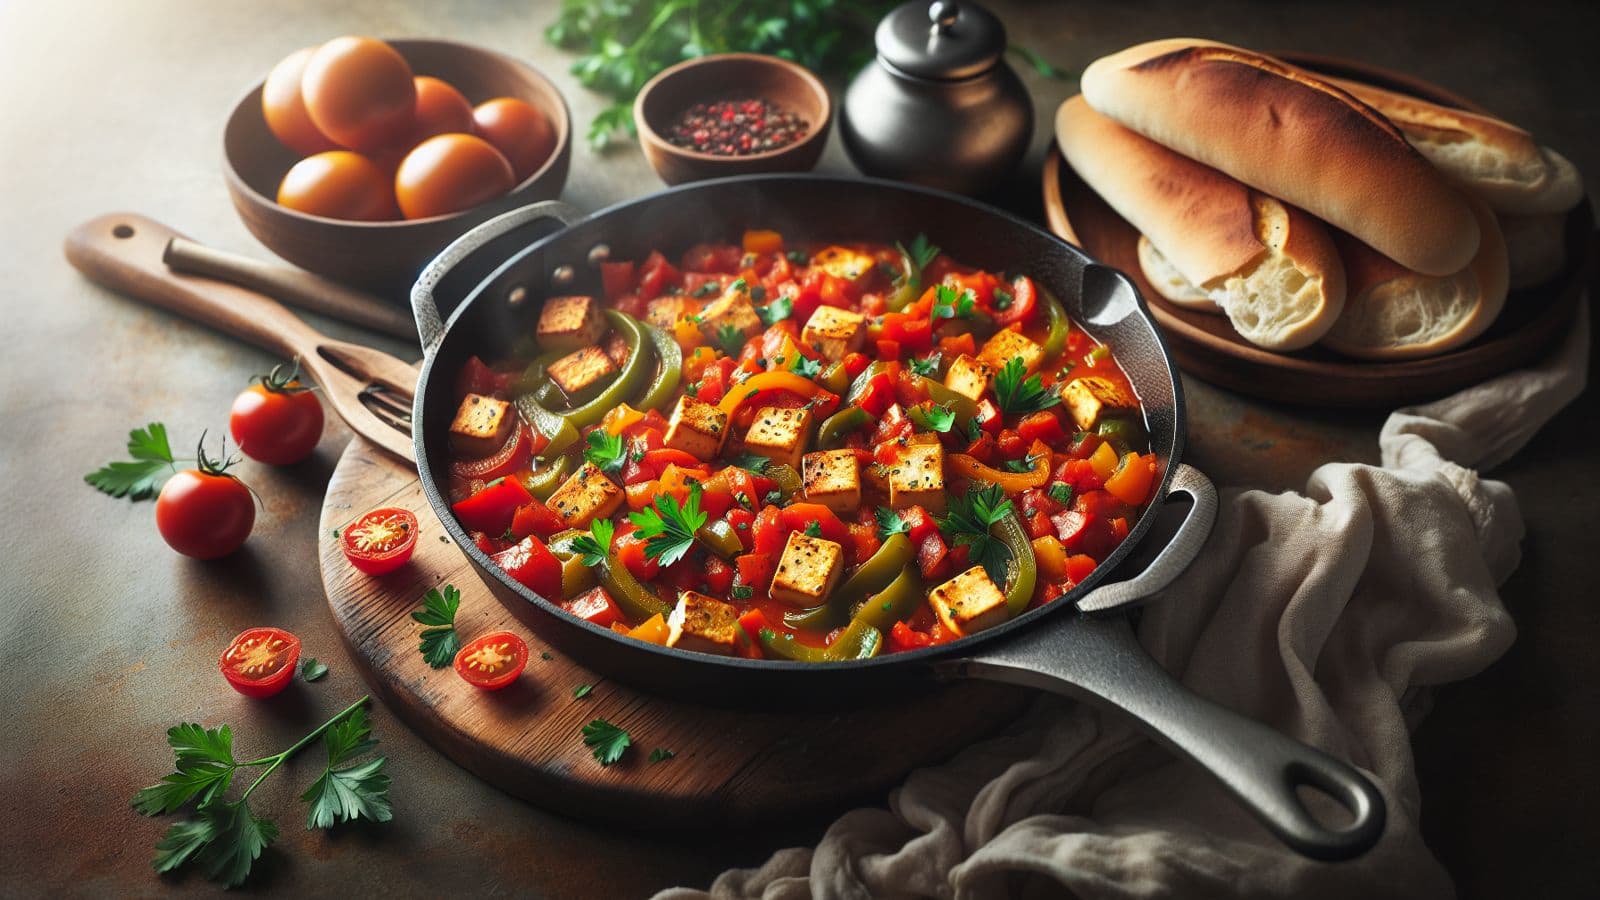 Guests coming over? Serve this traditional shakshuka with tofu